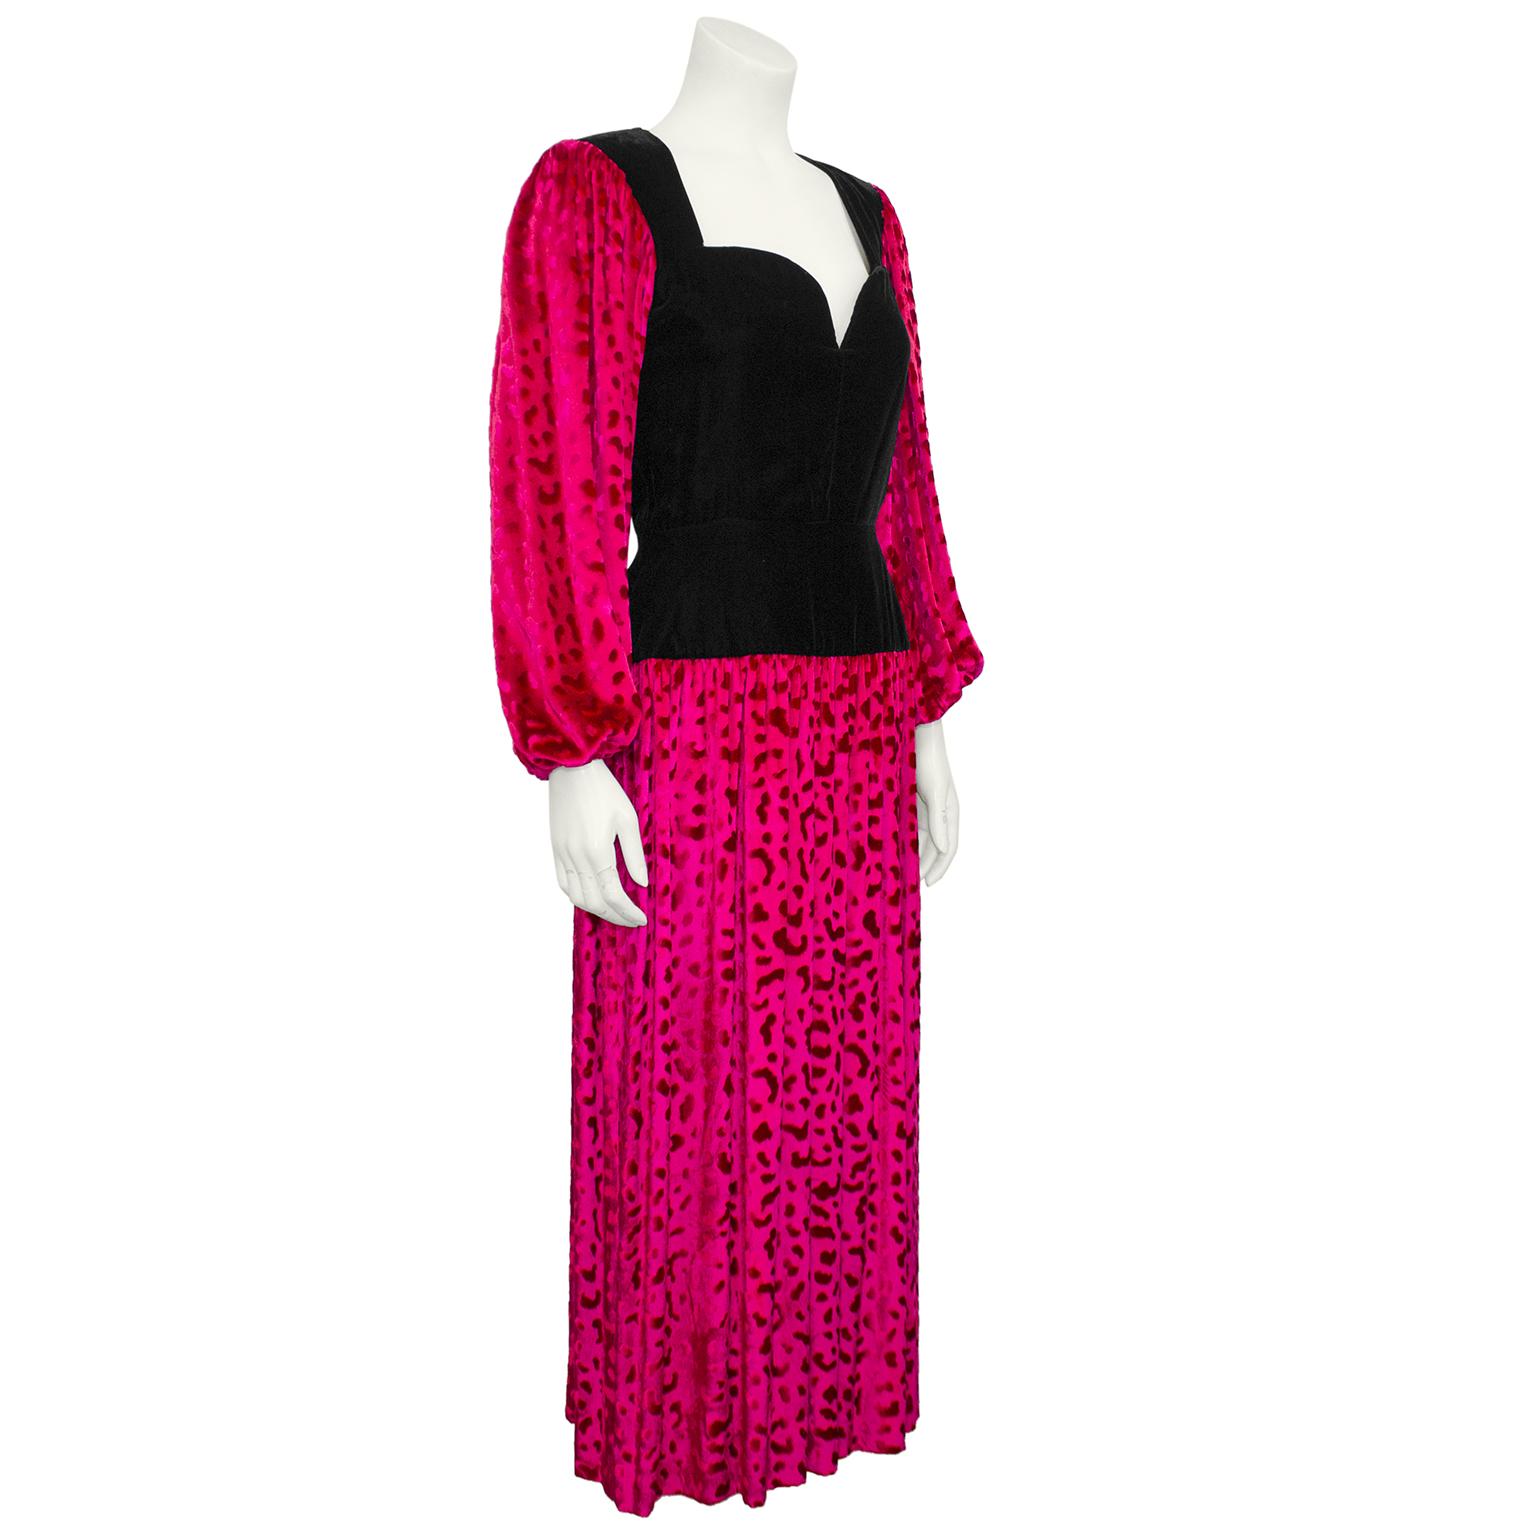 YSL Rive Gauche Black and Fuchsia patterned velvet dress from the Fall 1986 collection. The same dress was featured on the Runway in all black but this contrasting color version accentuates the beautiful velvet fabric. The black bodice has a